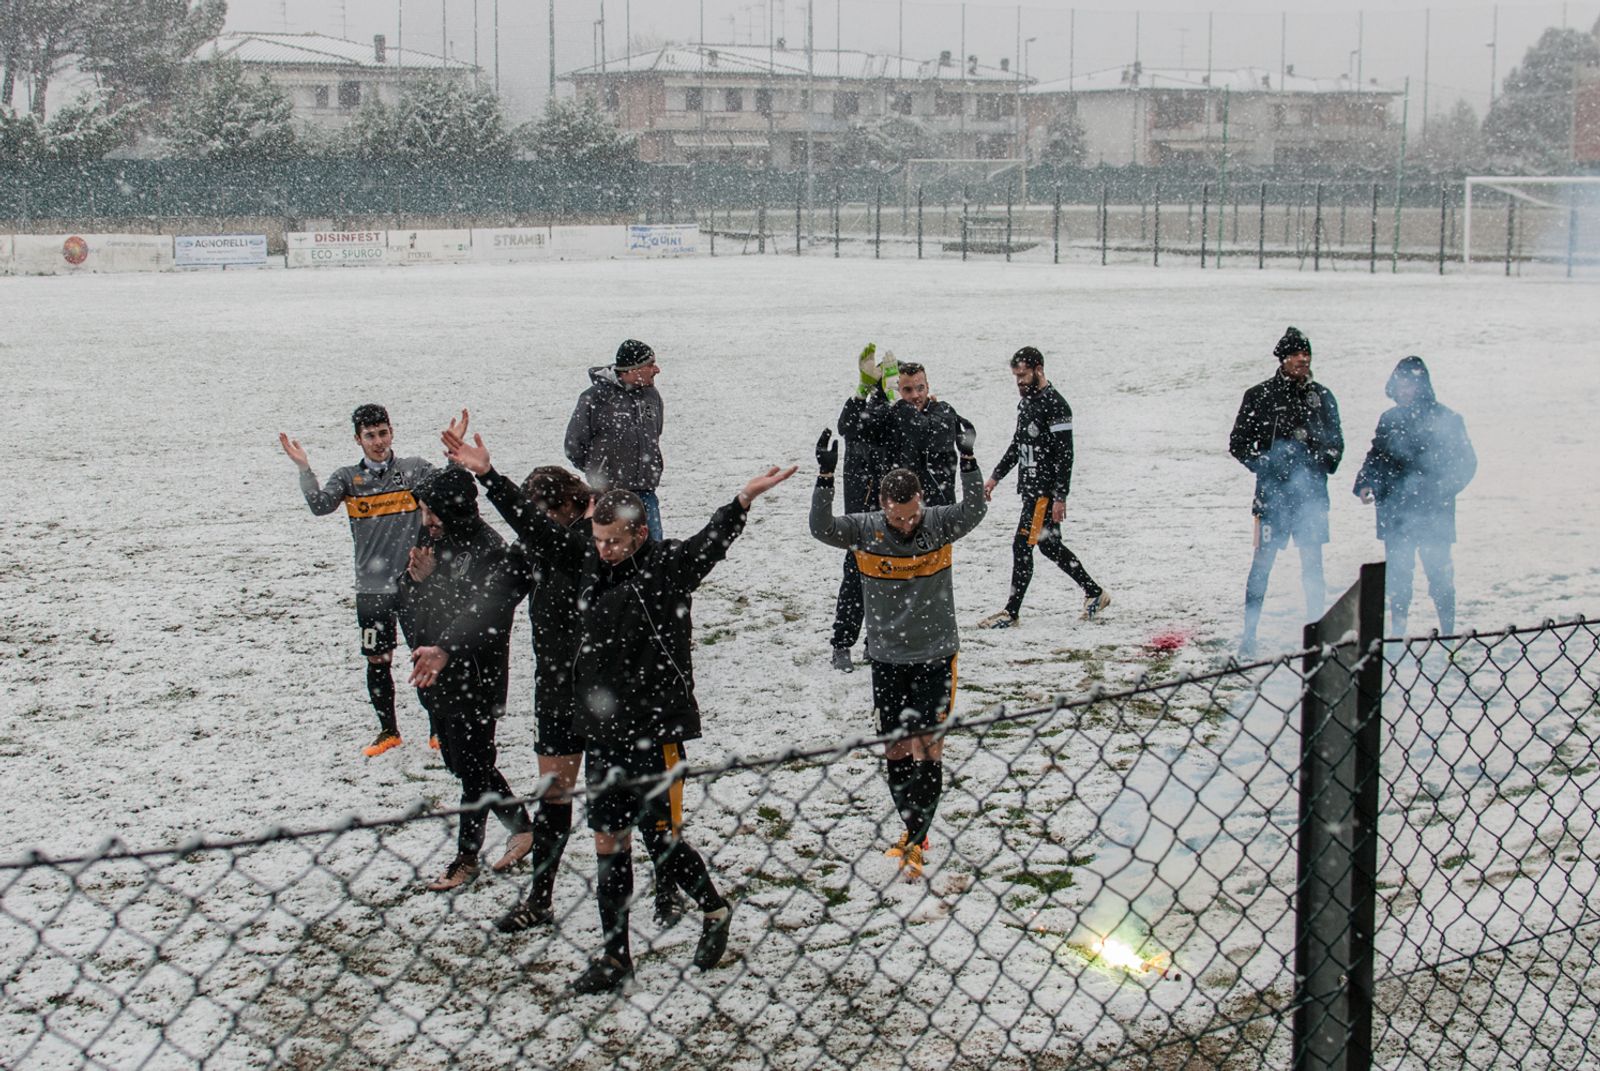 © Sara Esposito - The first team greet the supporters during a winter match away from home.